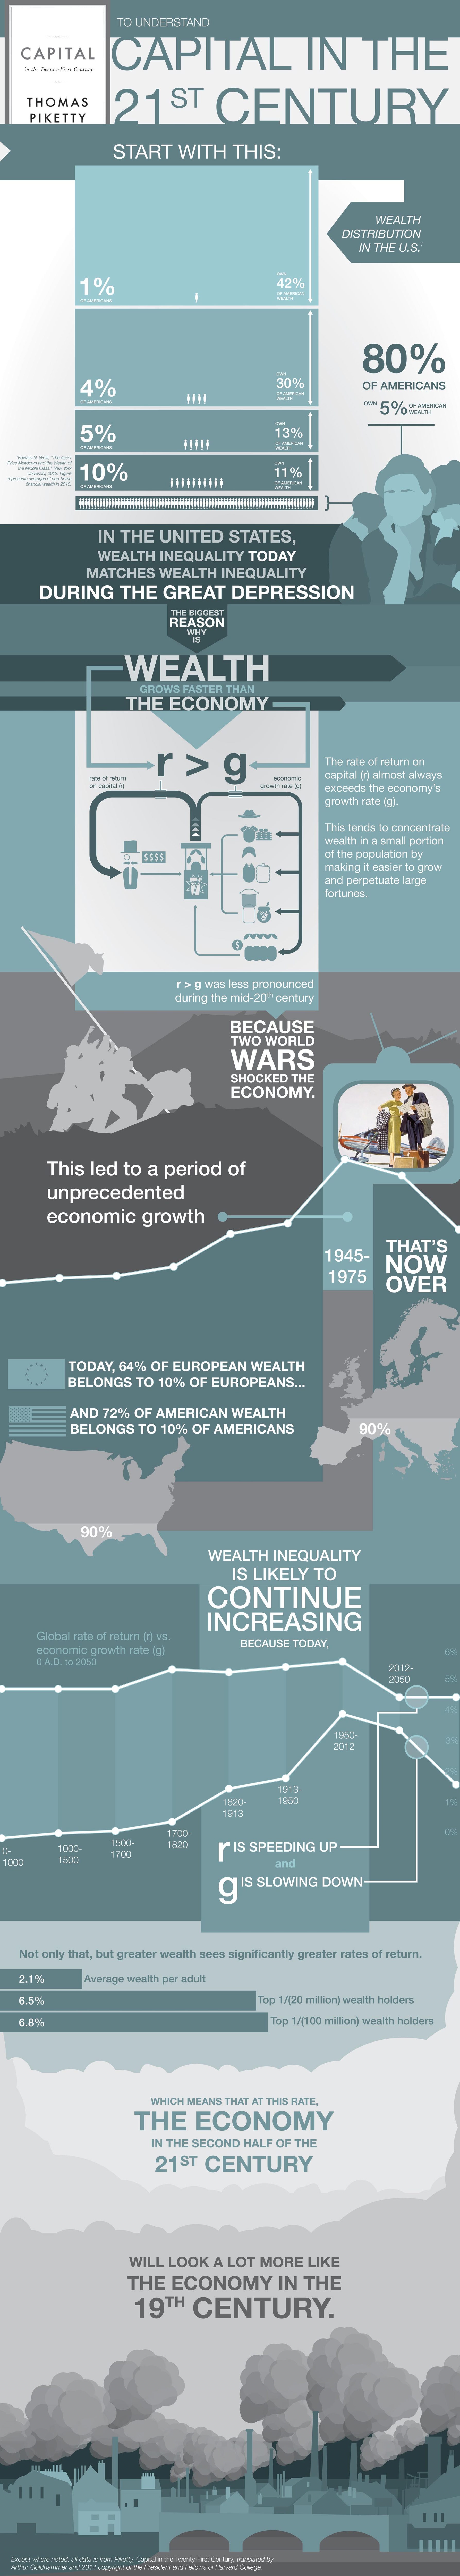 piketty-infographic-compressed